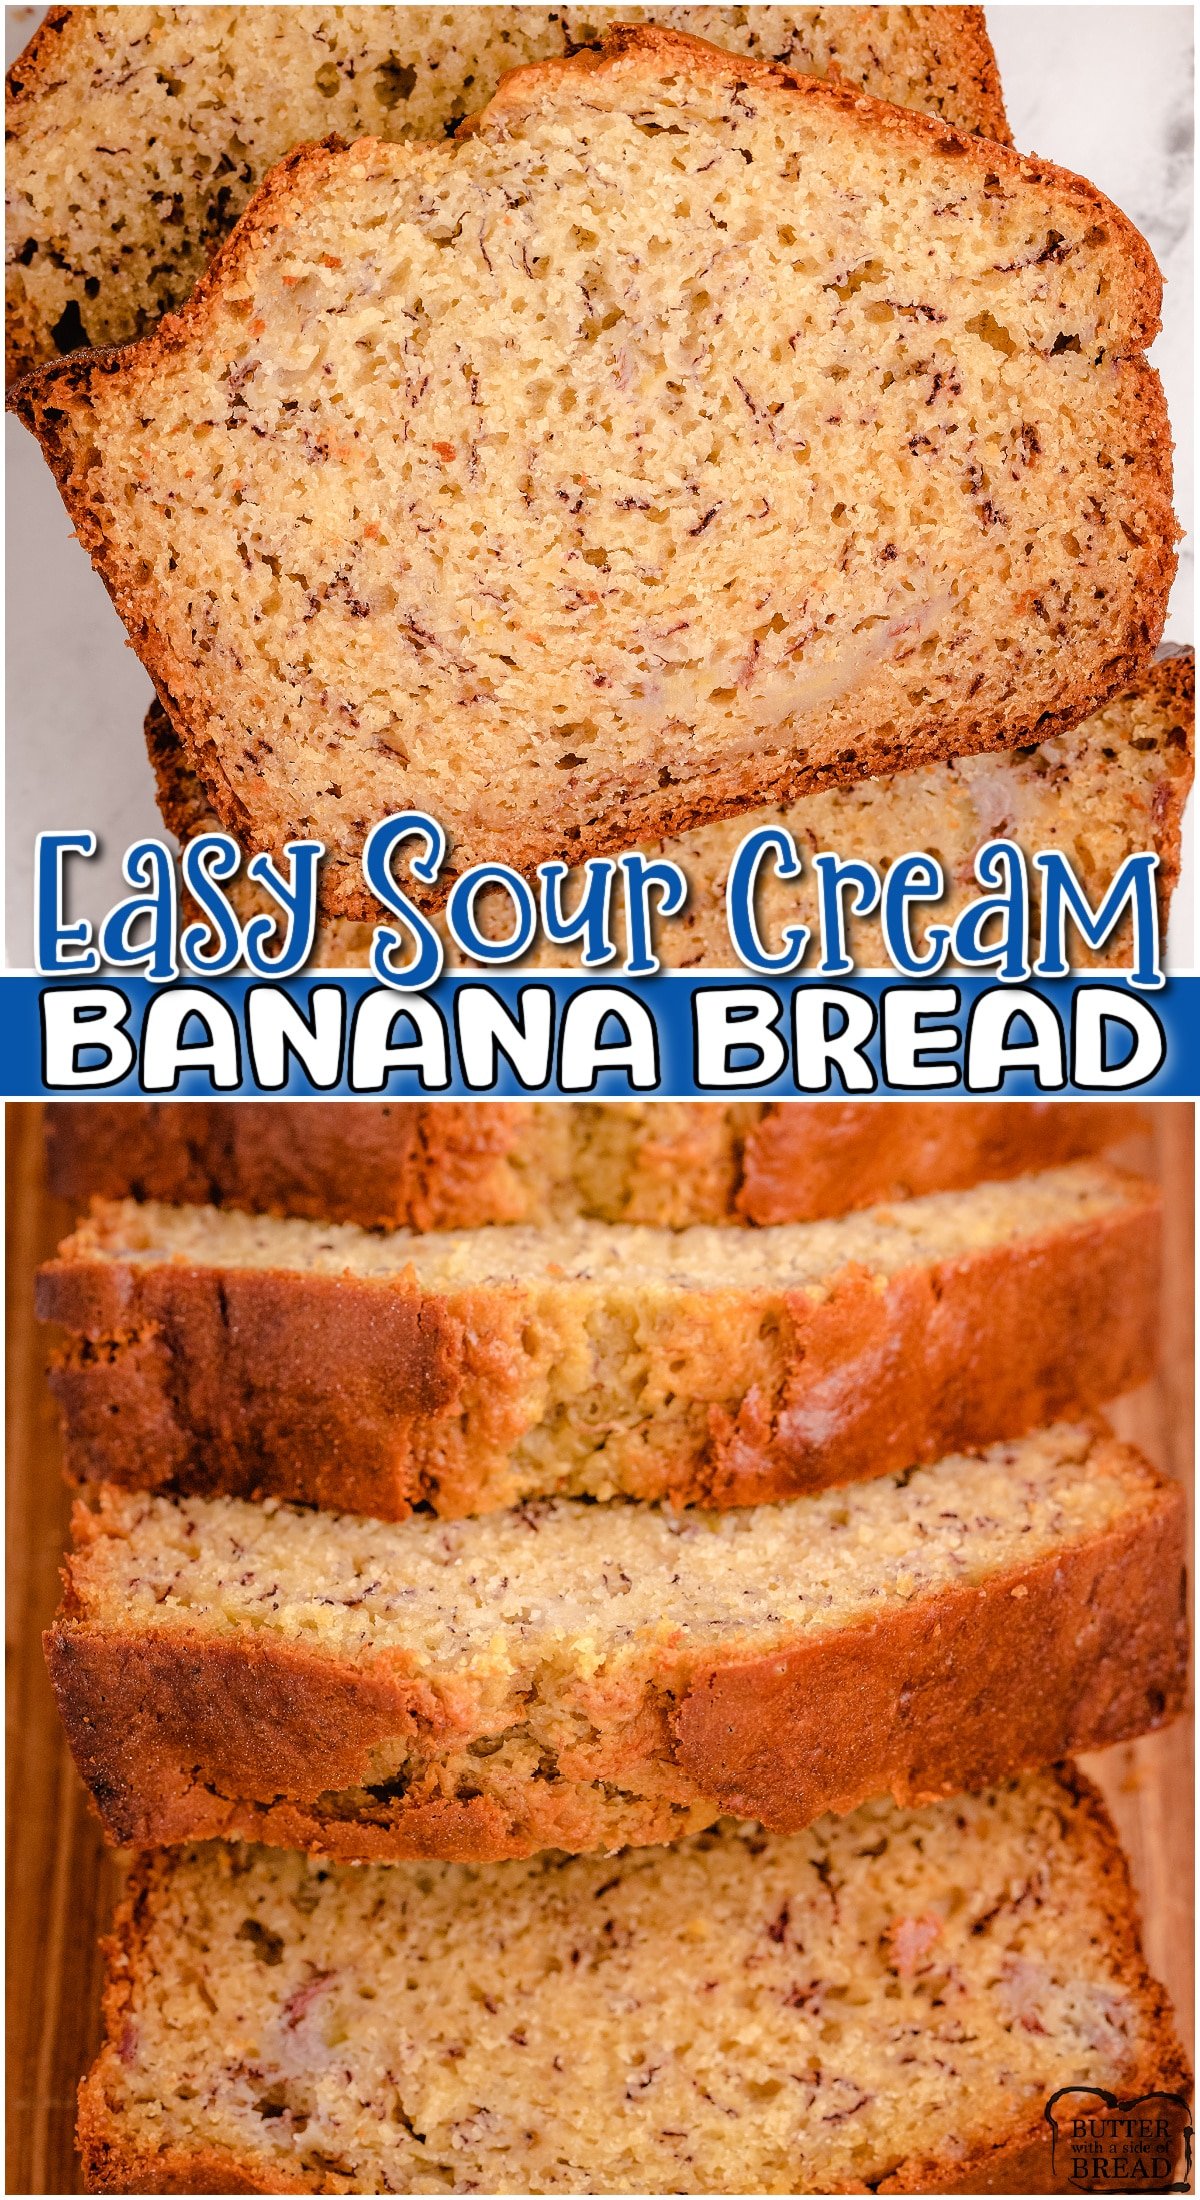 Sour Cream Banana Bread is packed with ripe bananas for perfectly sweet, flavorful bread. Lovely moist banana bread recipe that uses sour cream for texture and a perfect crumb.